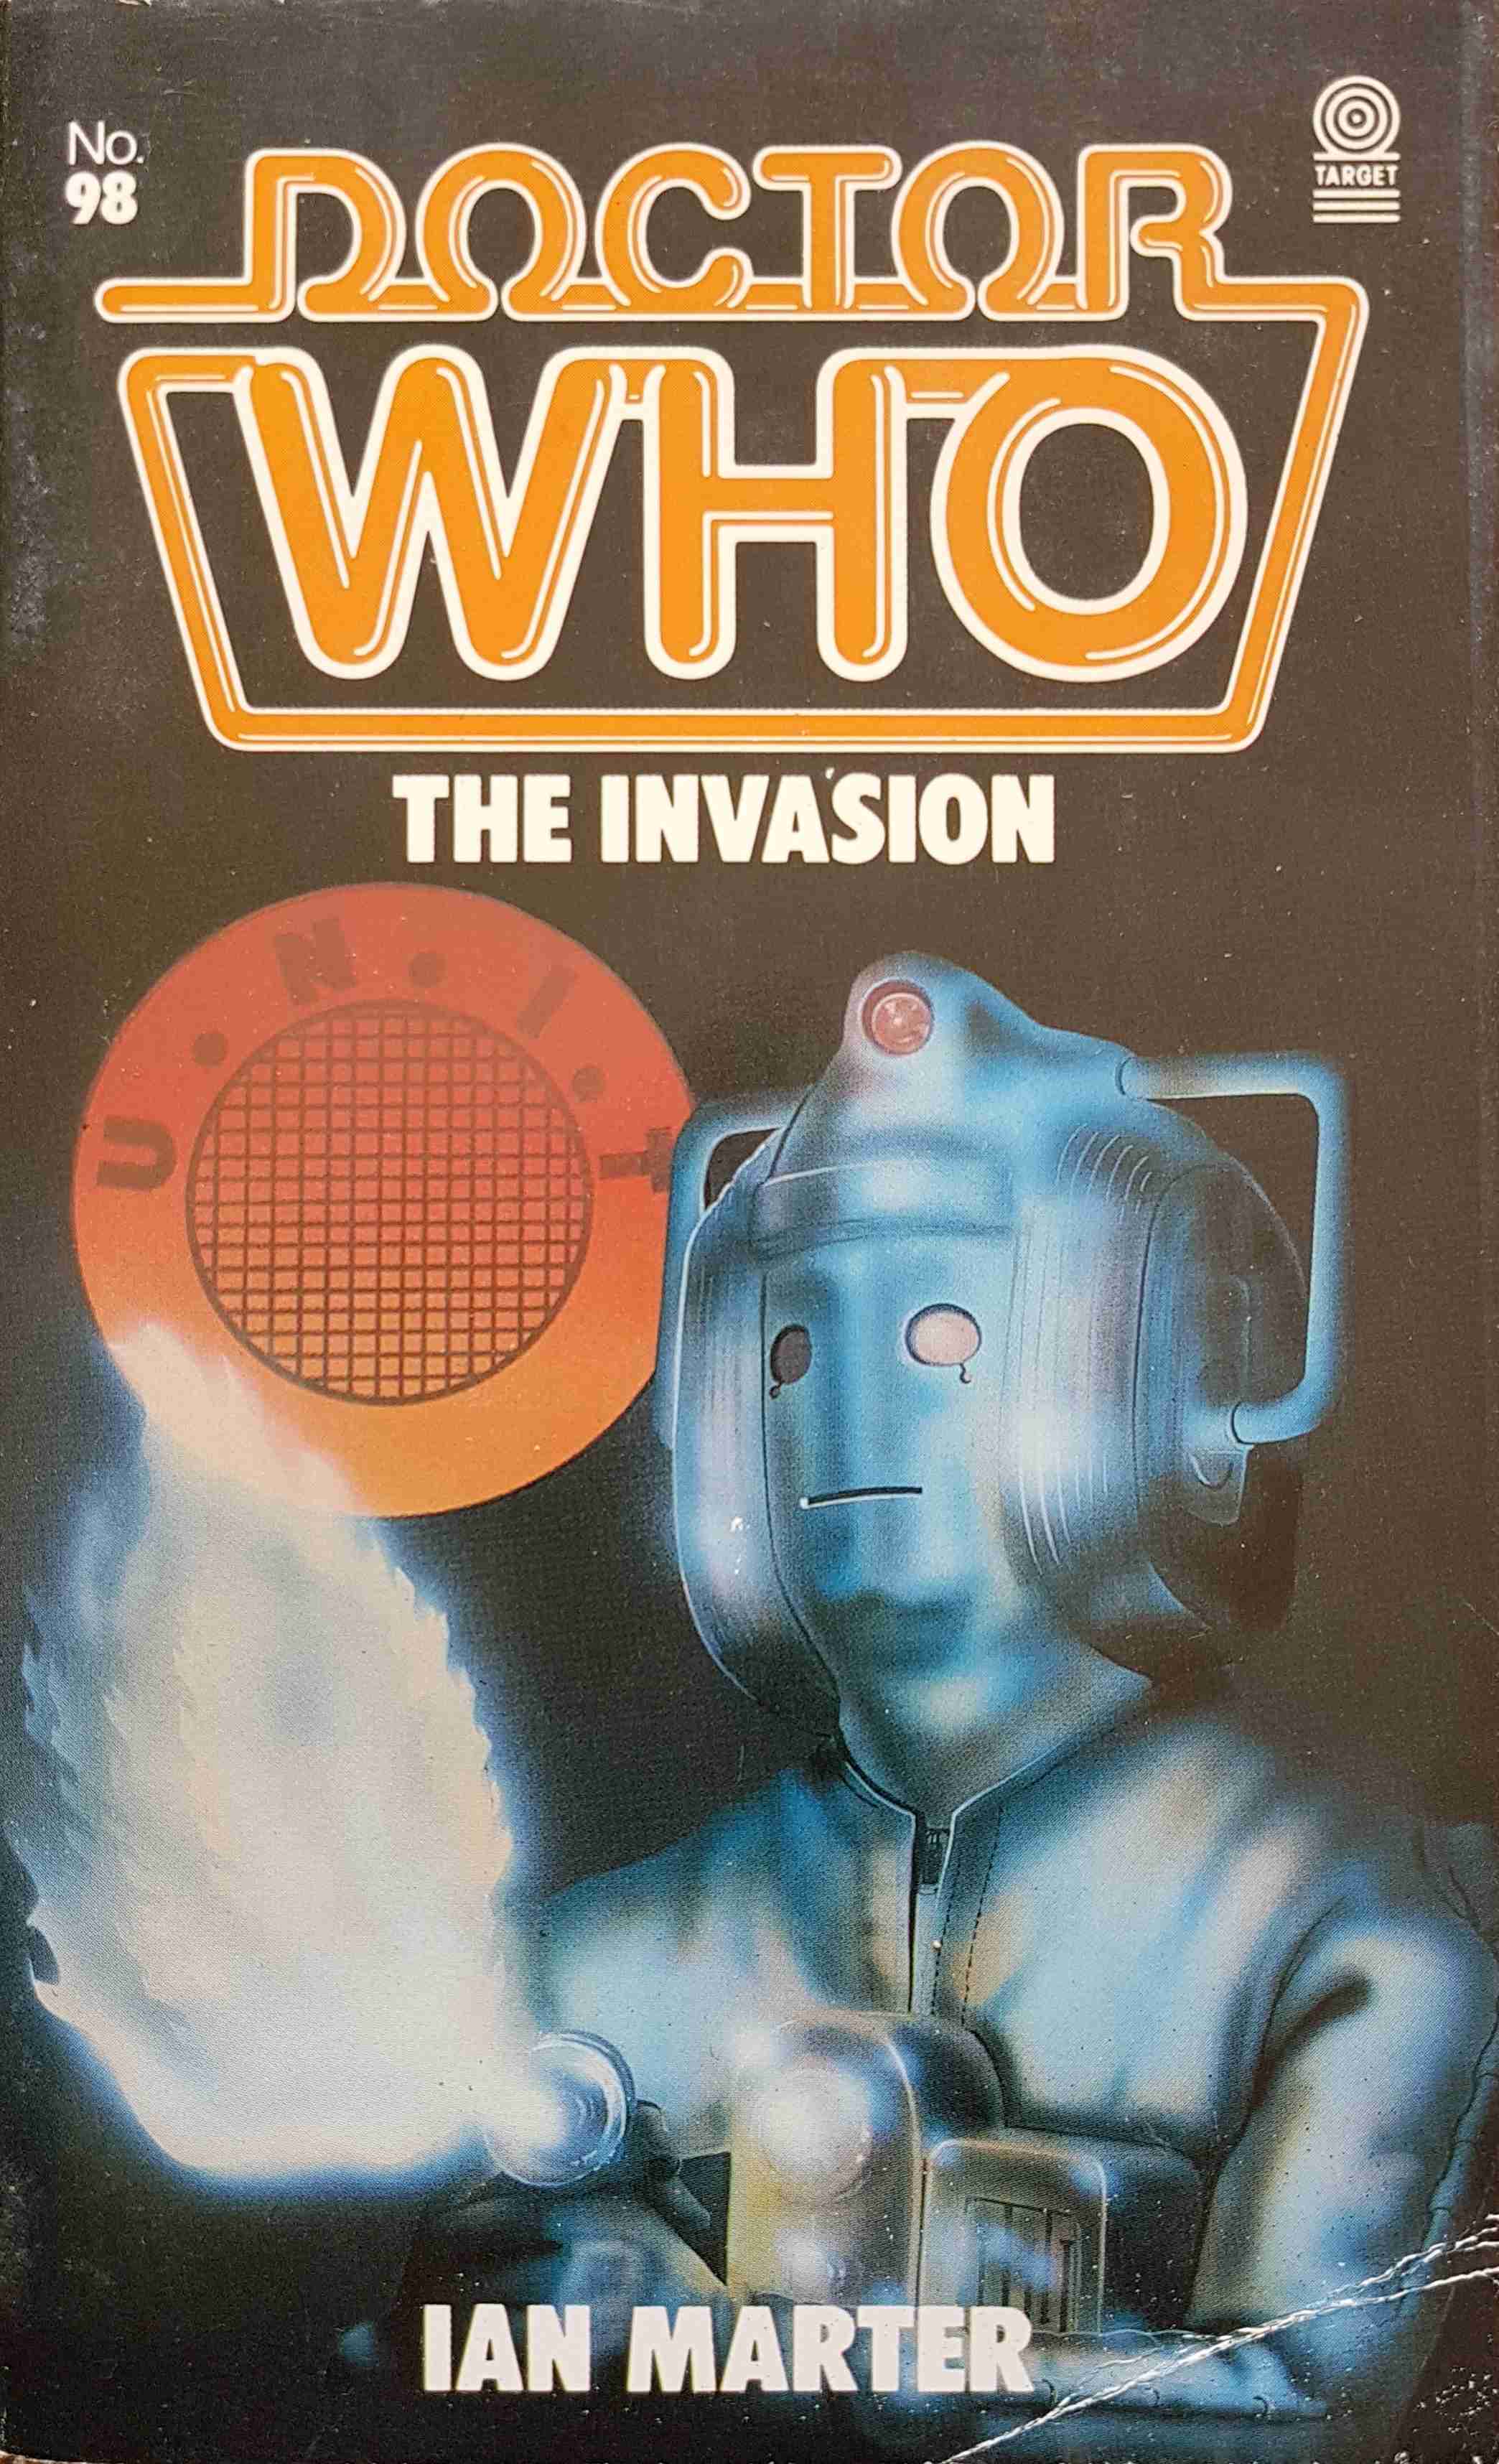 Picture of 0-426-20169-8 Doctor Who - The invasion by artist Ian Marter from the BBC records and Tapes library